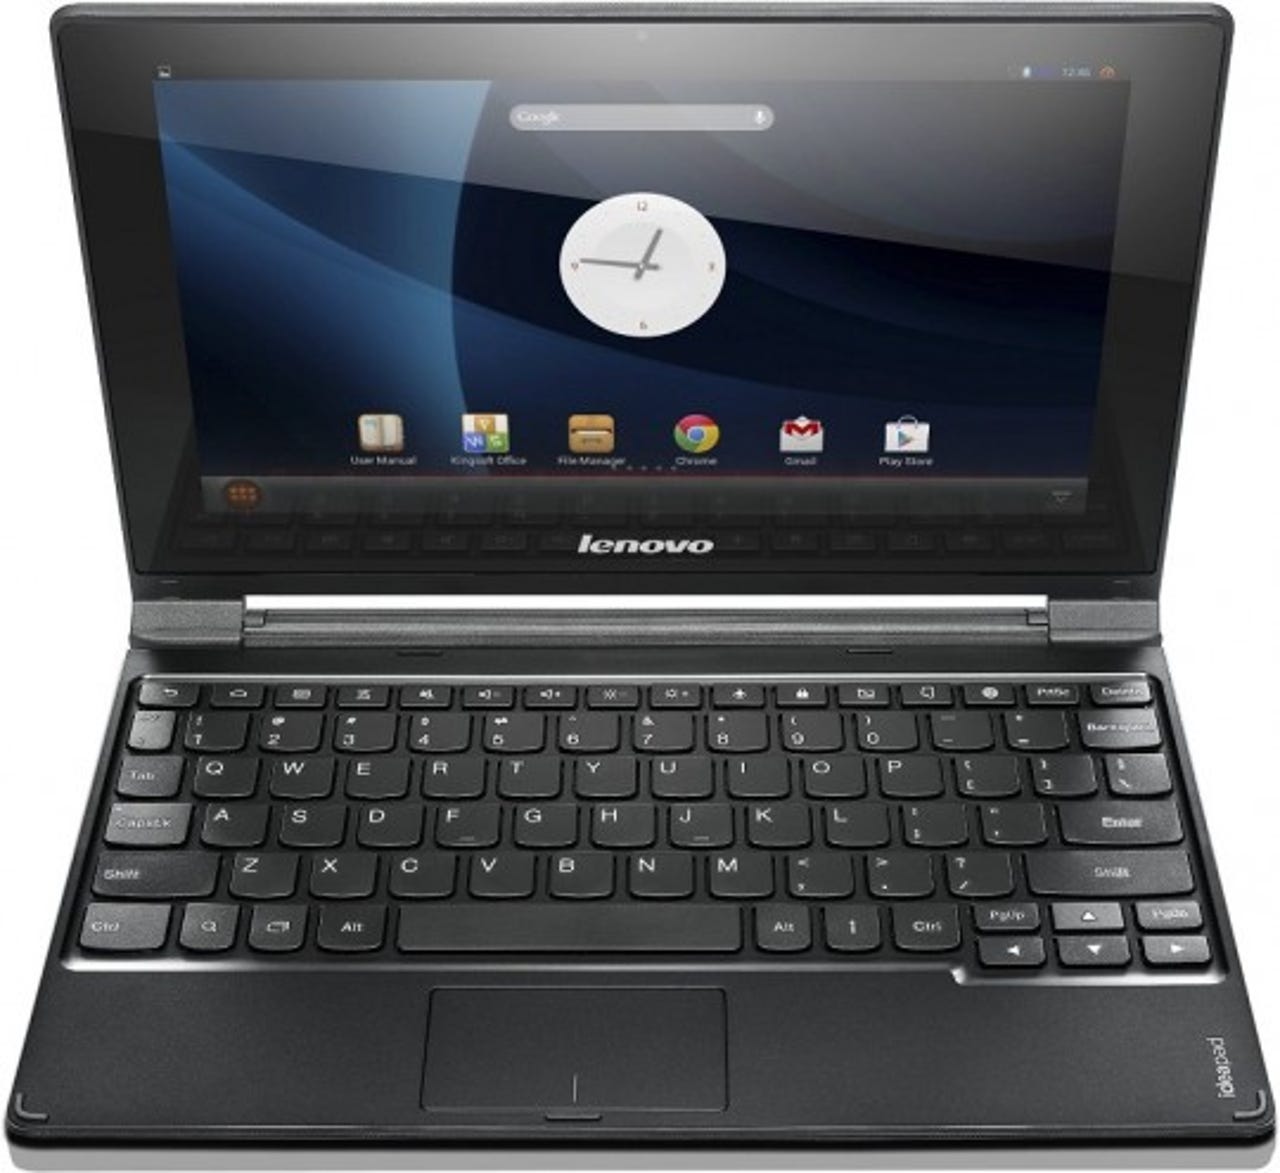 Lenovo confirms IdeaPad A10 Android laptop after leaking manual online |  ZDNET